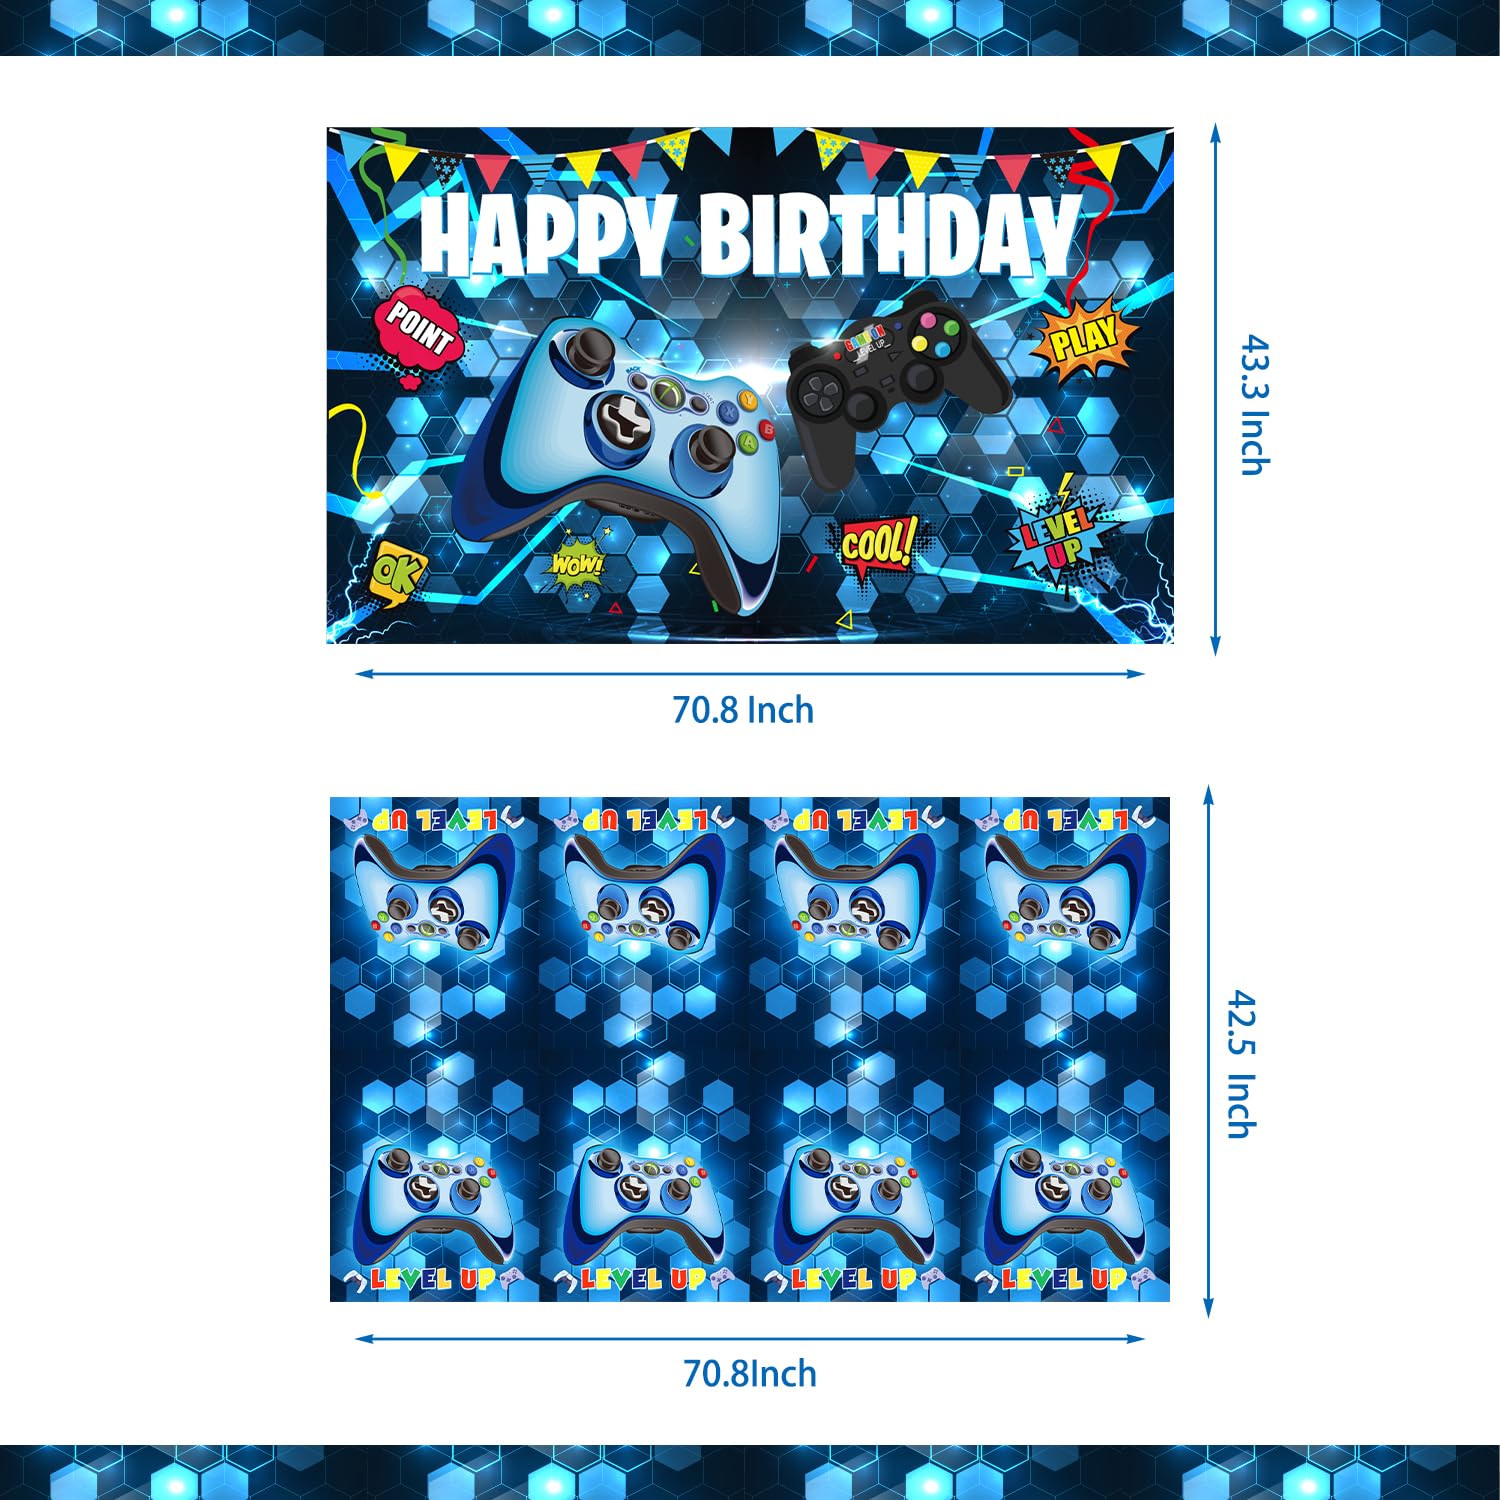 Mpanwen Blue Gamer Birthday Party Decoration - 218Pcs Video Game Gaming Party Supplies For Boys Birthday Party - Backdrop, Table Cover, Cupcakes Wrappers, Stickers, Bracelets Serves 10 Guests